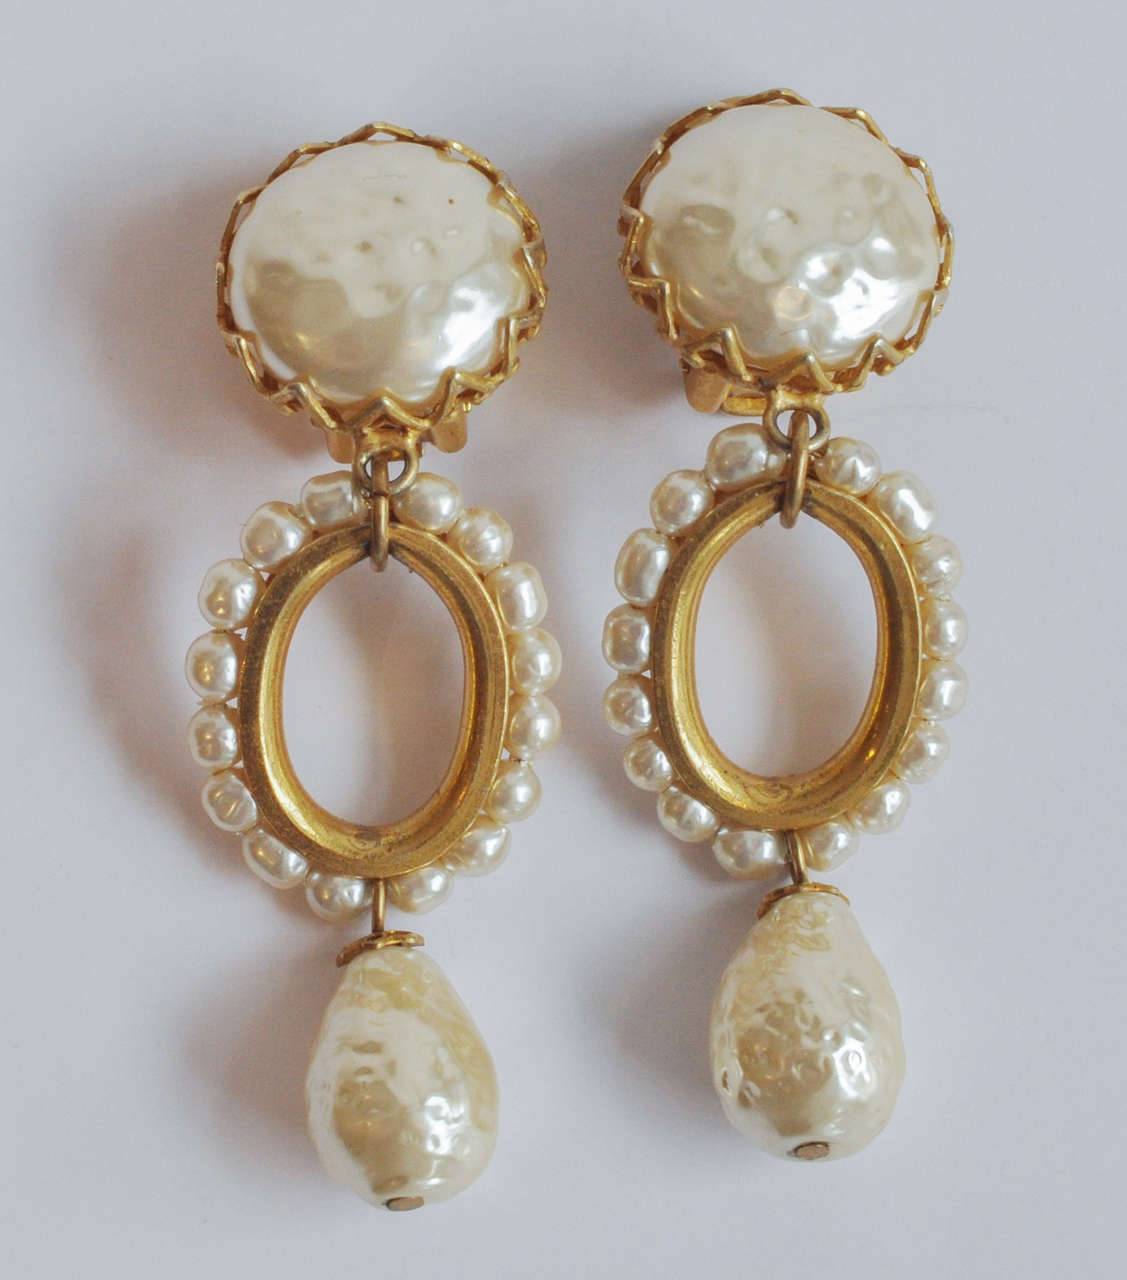 A classic and elegant pair of Miriam Haskell pearl earrings with an interesting oval design.
Clip backs. Signed.